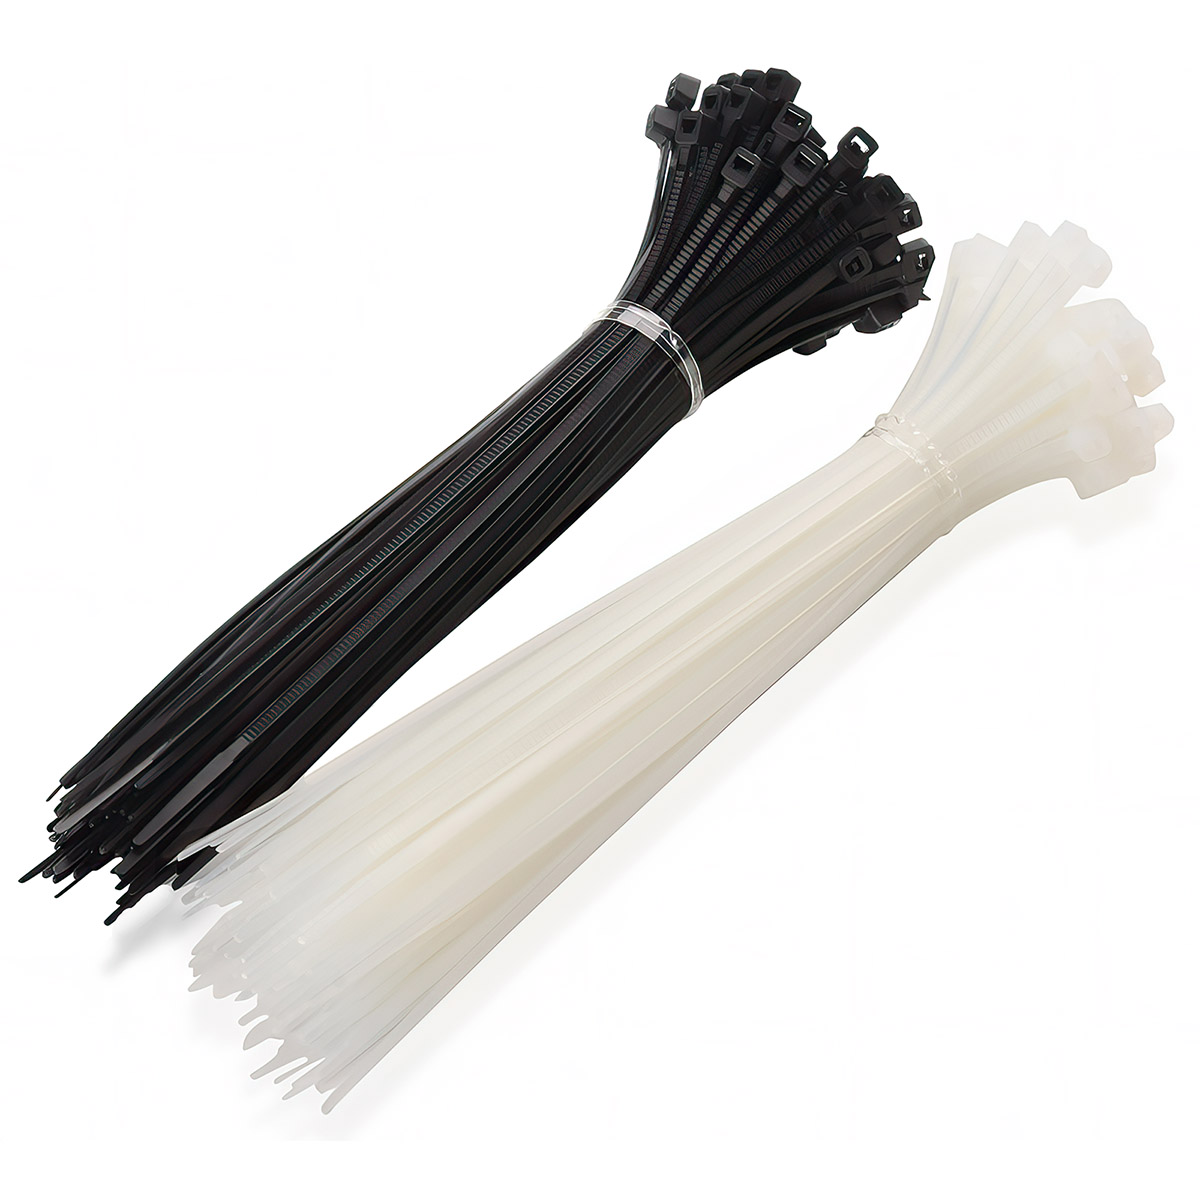 http://www.guineapigcagesstore.com/Shared/Images/Product/Cable-Ties/cableties-zipties-6inch.jpg